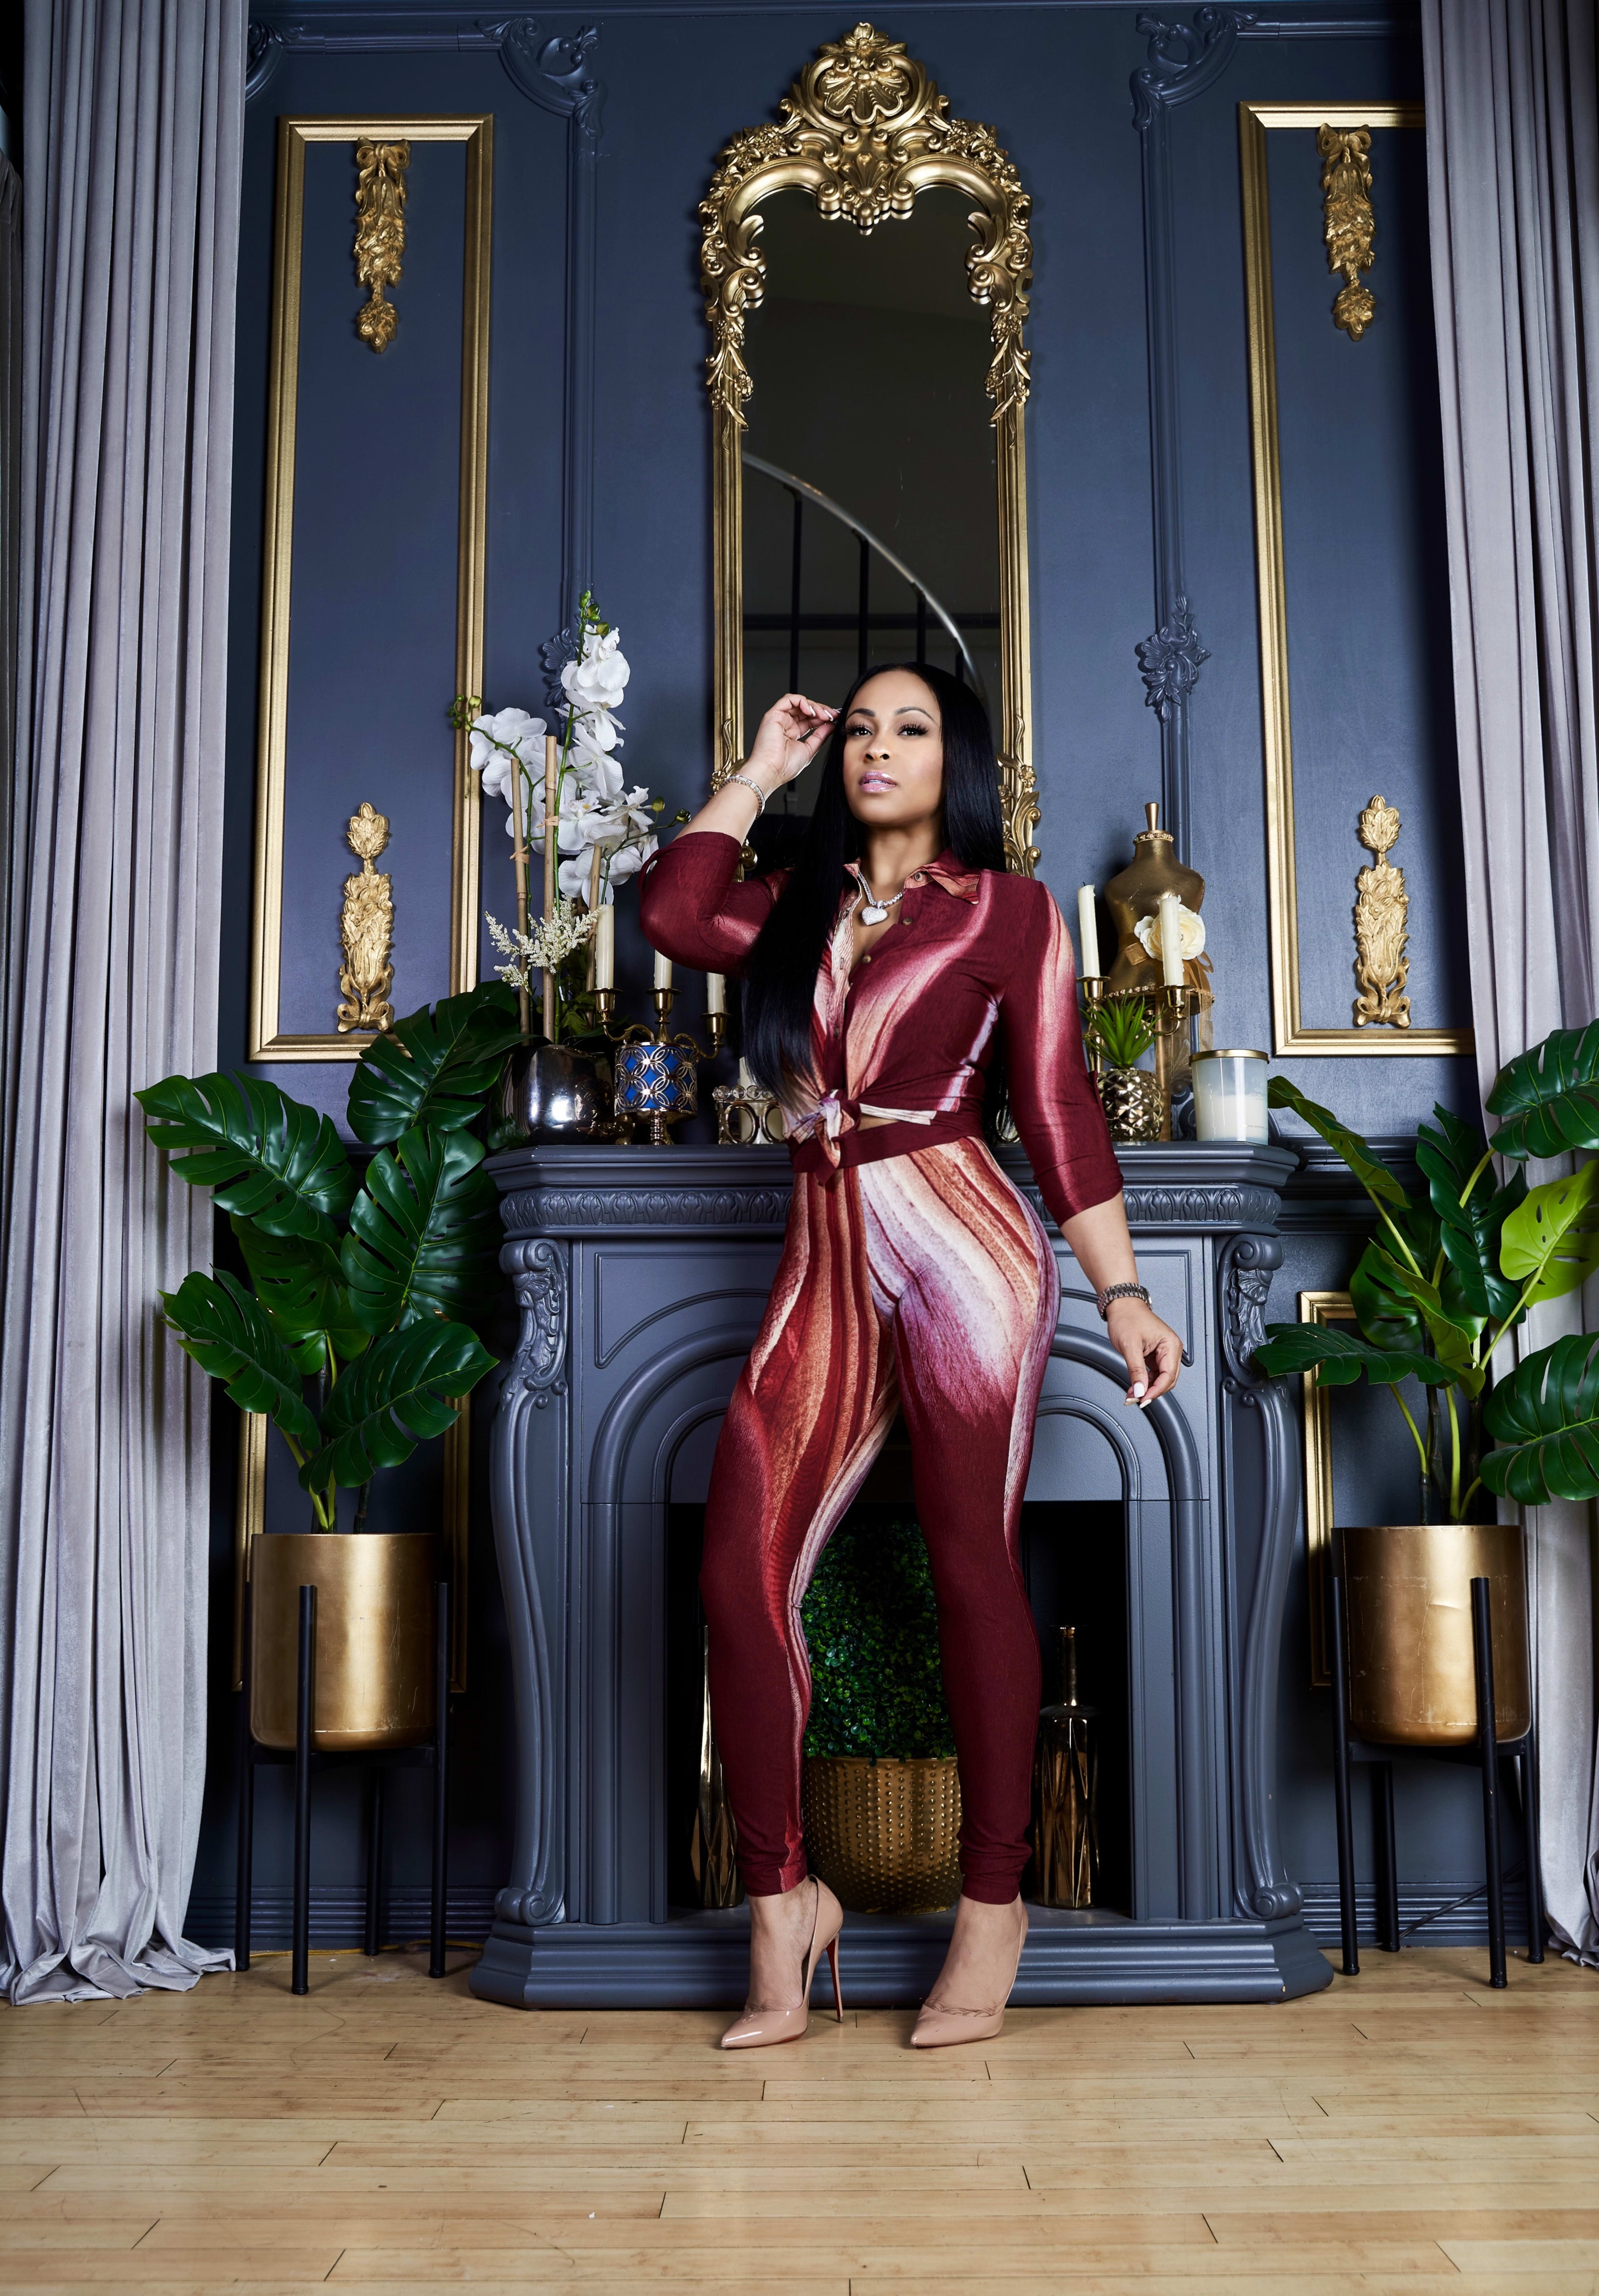 A fashion photoshoot featuring a woman standing in front of a blue and gold fireplace with plants.